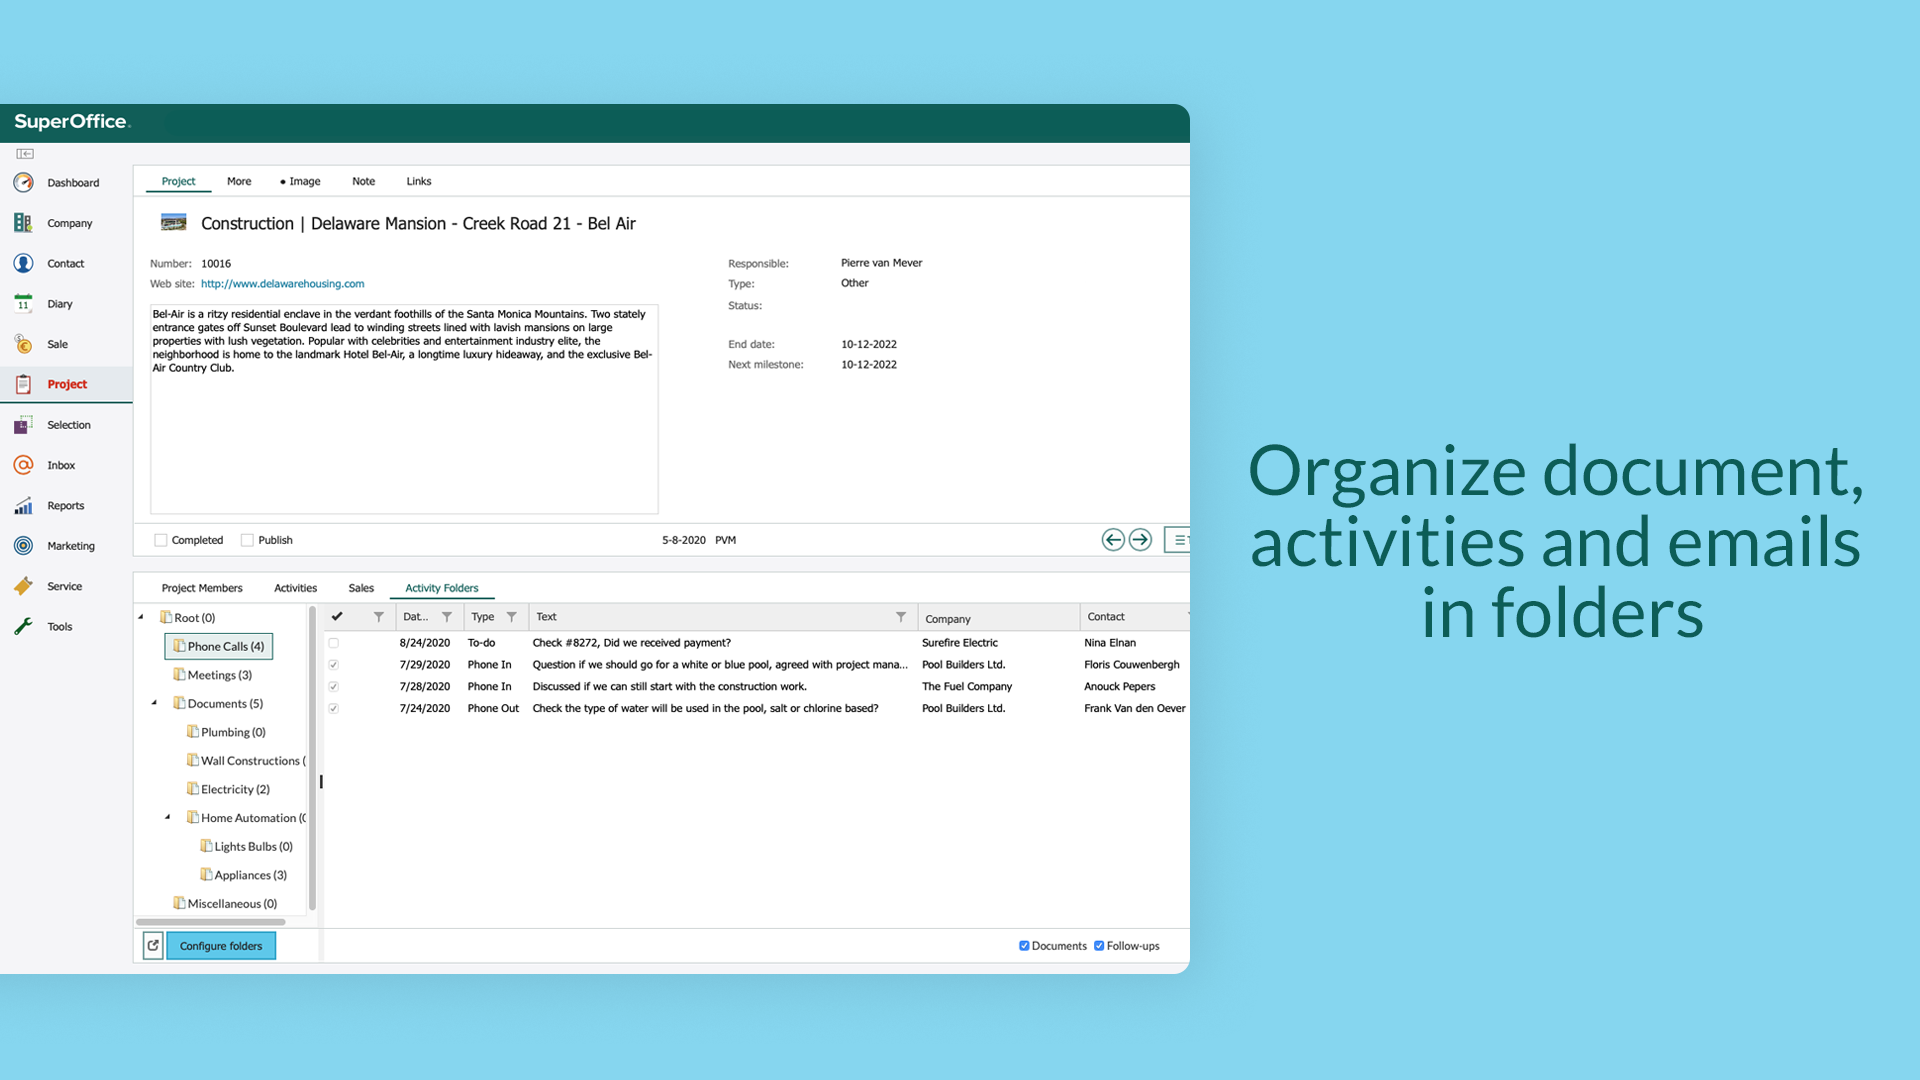 Organize documents, emails, and activities in folders